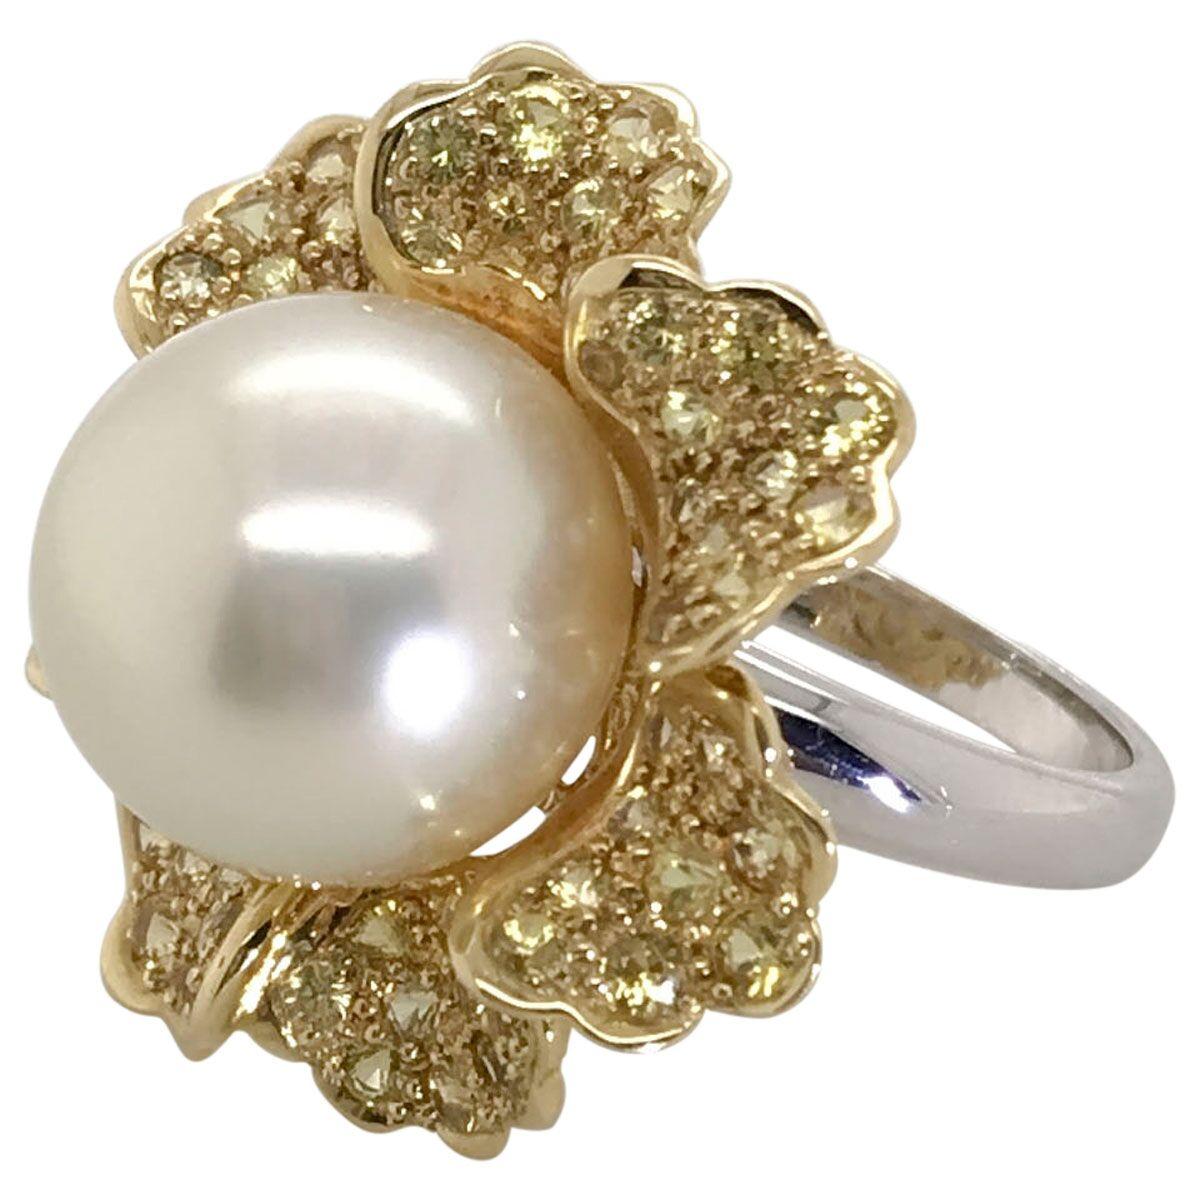 Direct from the pristine waters off Western Australia, this amazing South Sea Pearl ring is a standout. Looking radiant on the finger like a big sunflower with glistening yellow sapphires mounted in 18k yellow gold. At the centre is a magnificent